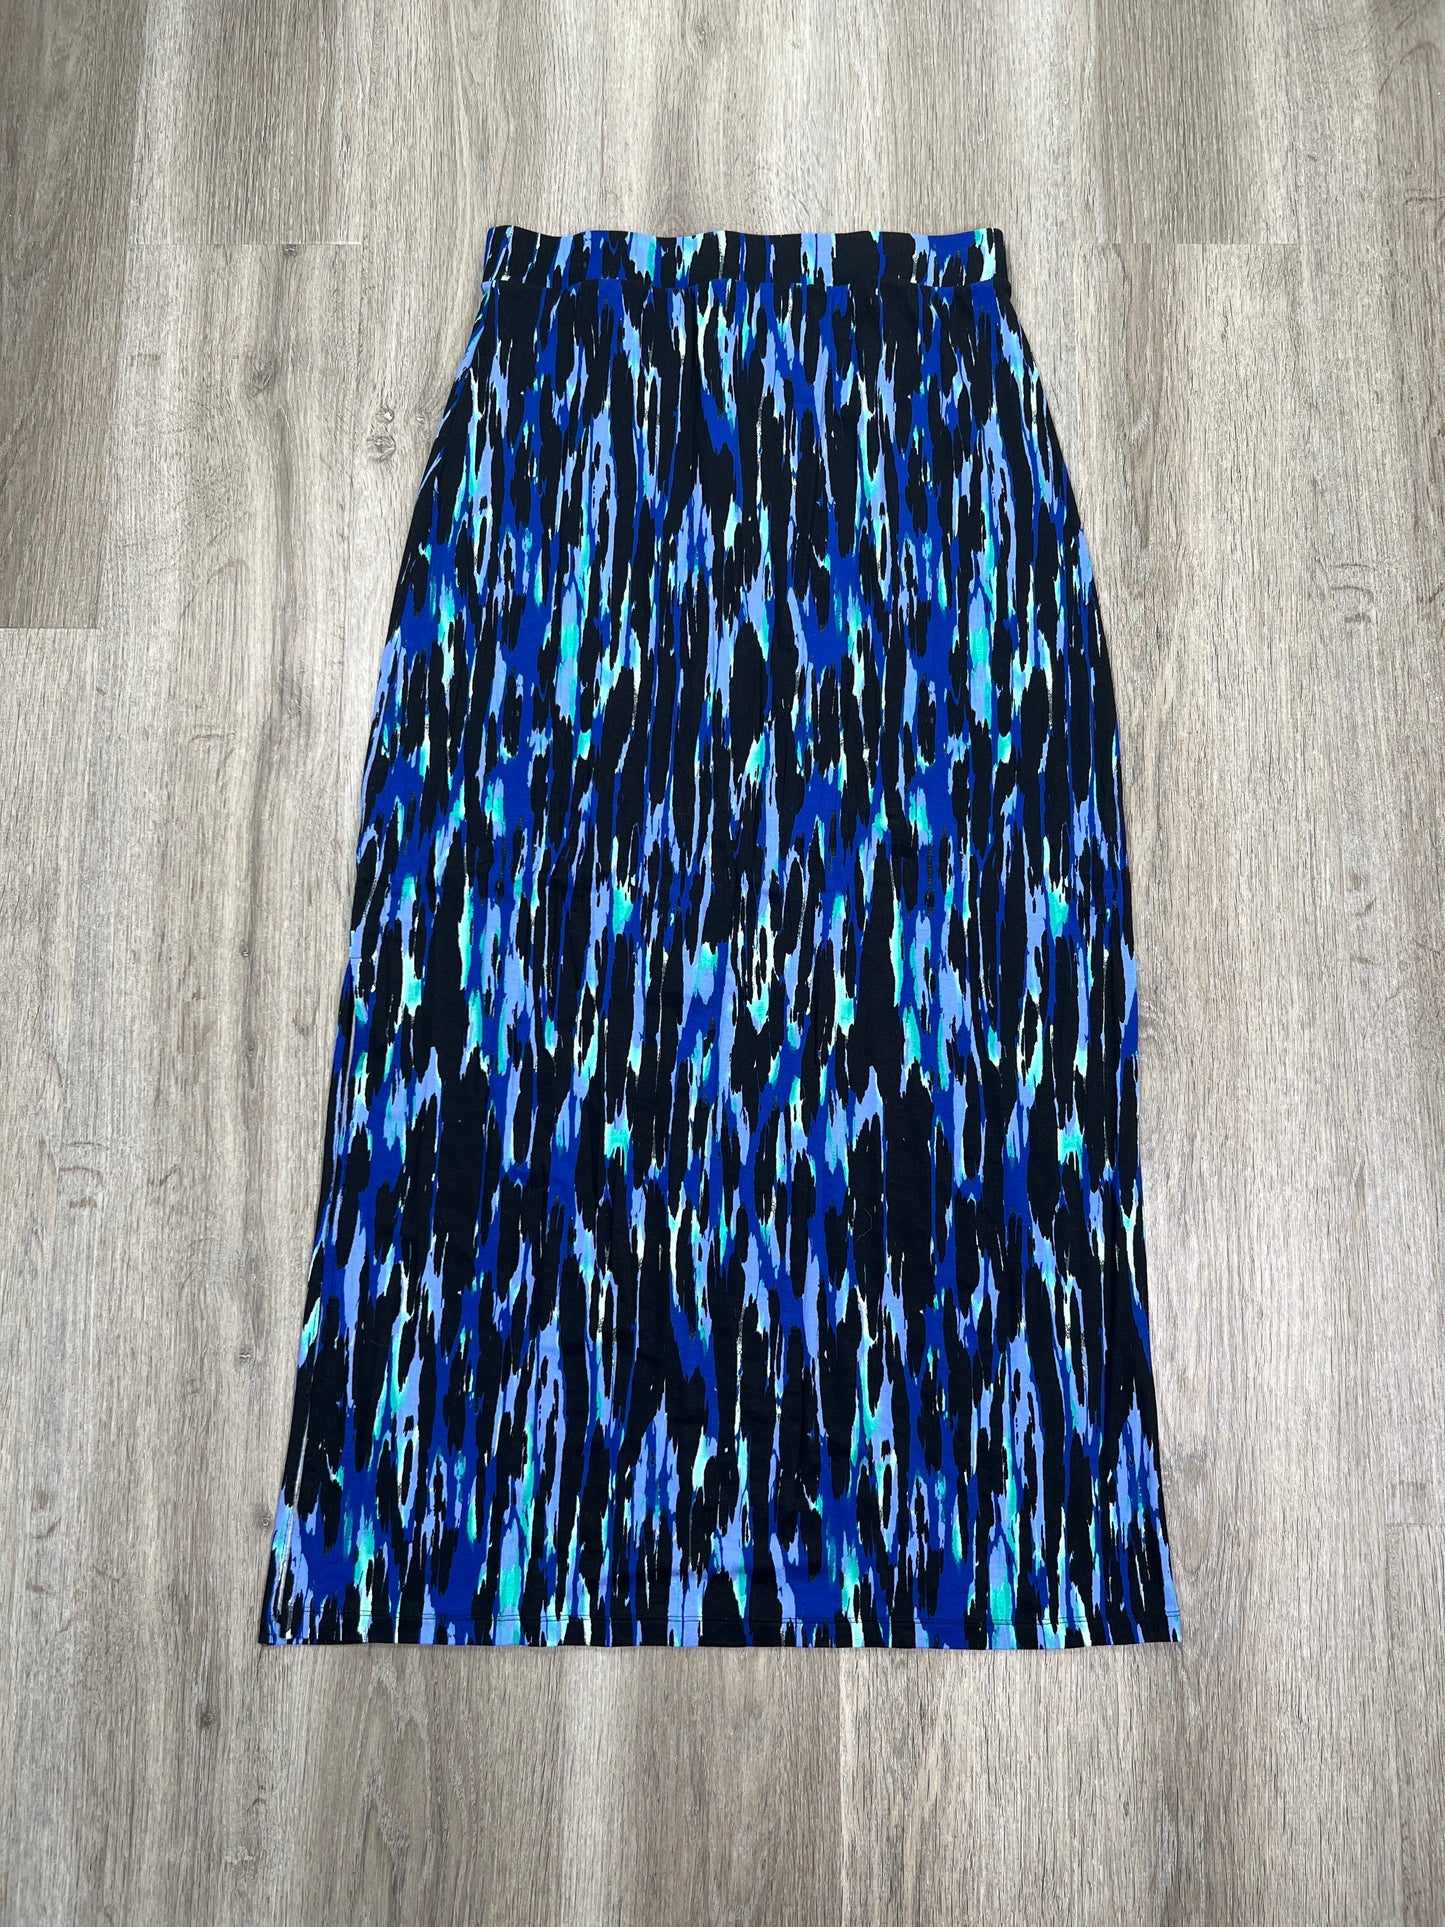 Skirt Maxi By Apt 9  Size: M